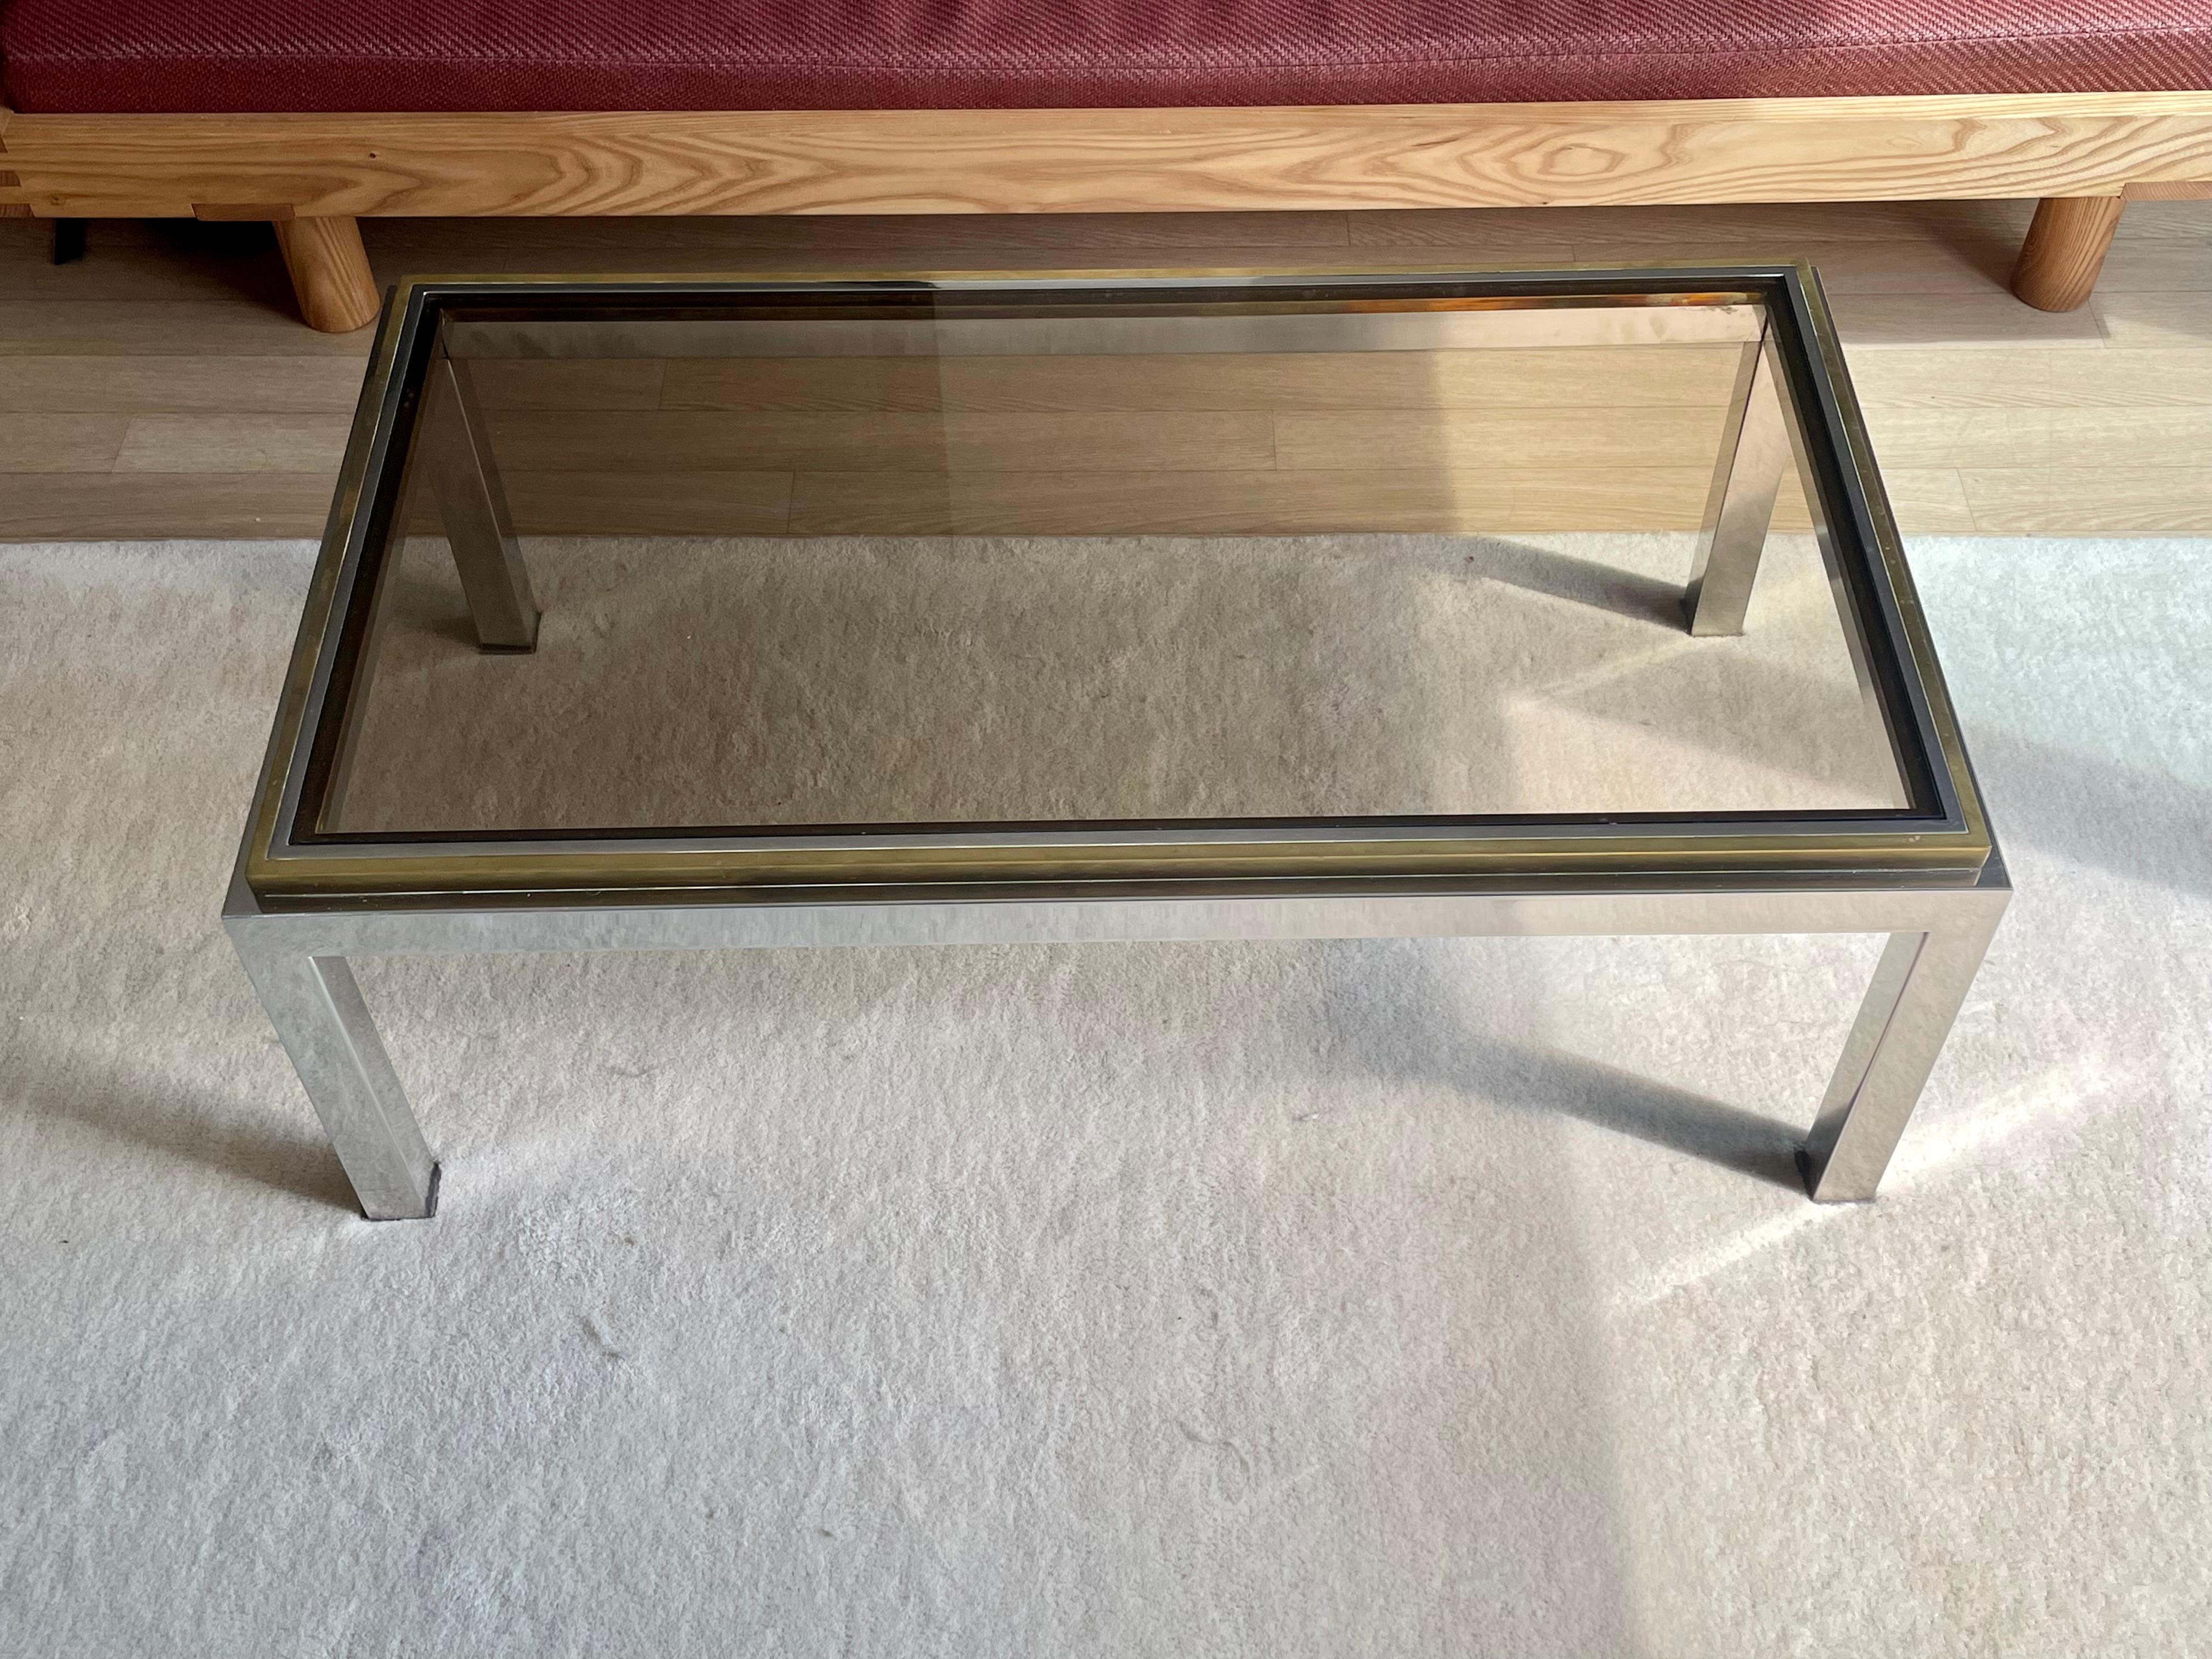 Late 20th Century Low table by Willy Rizzo - model Flaminia -circa 1970 For Sale